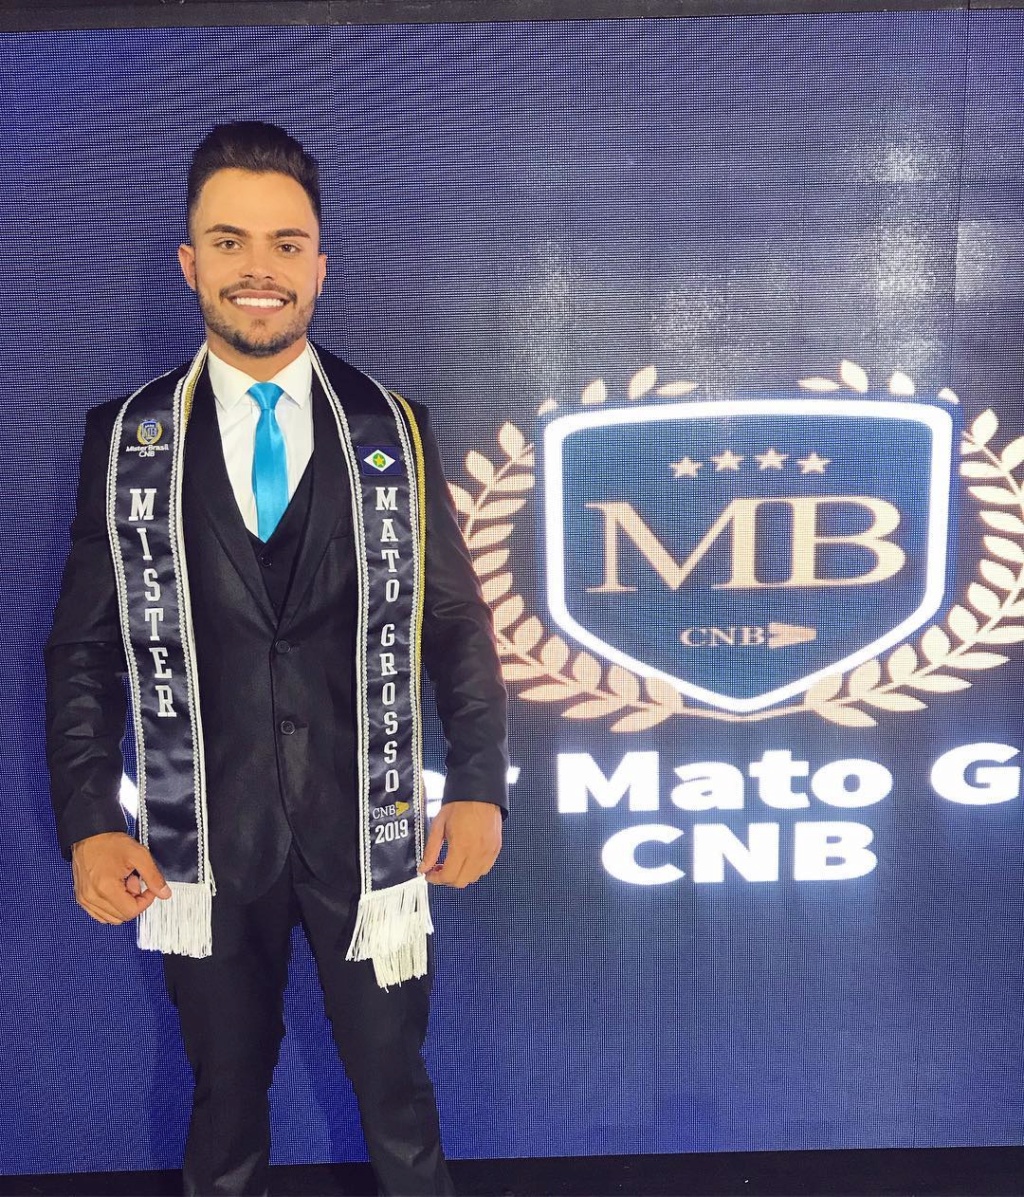 Road to Mister BRASIL CNB 2019 is Paraiba 54436710